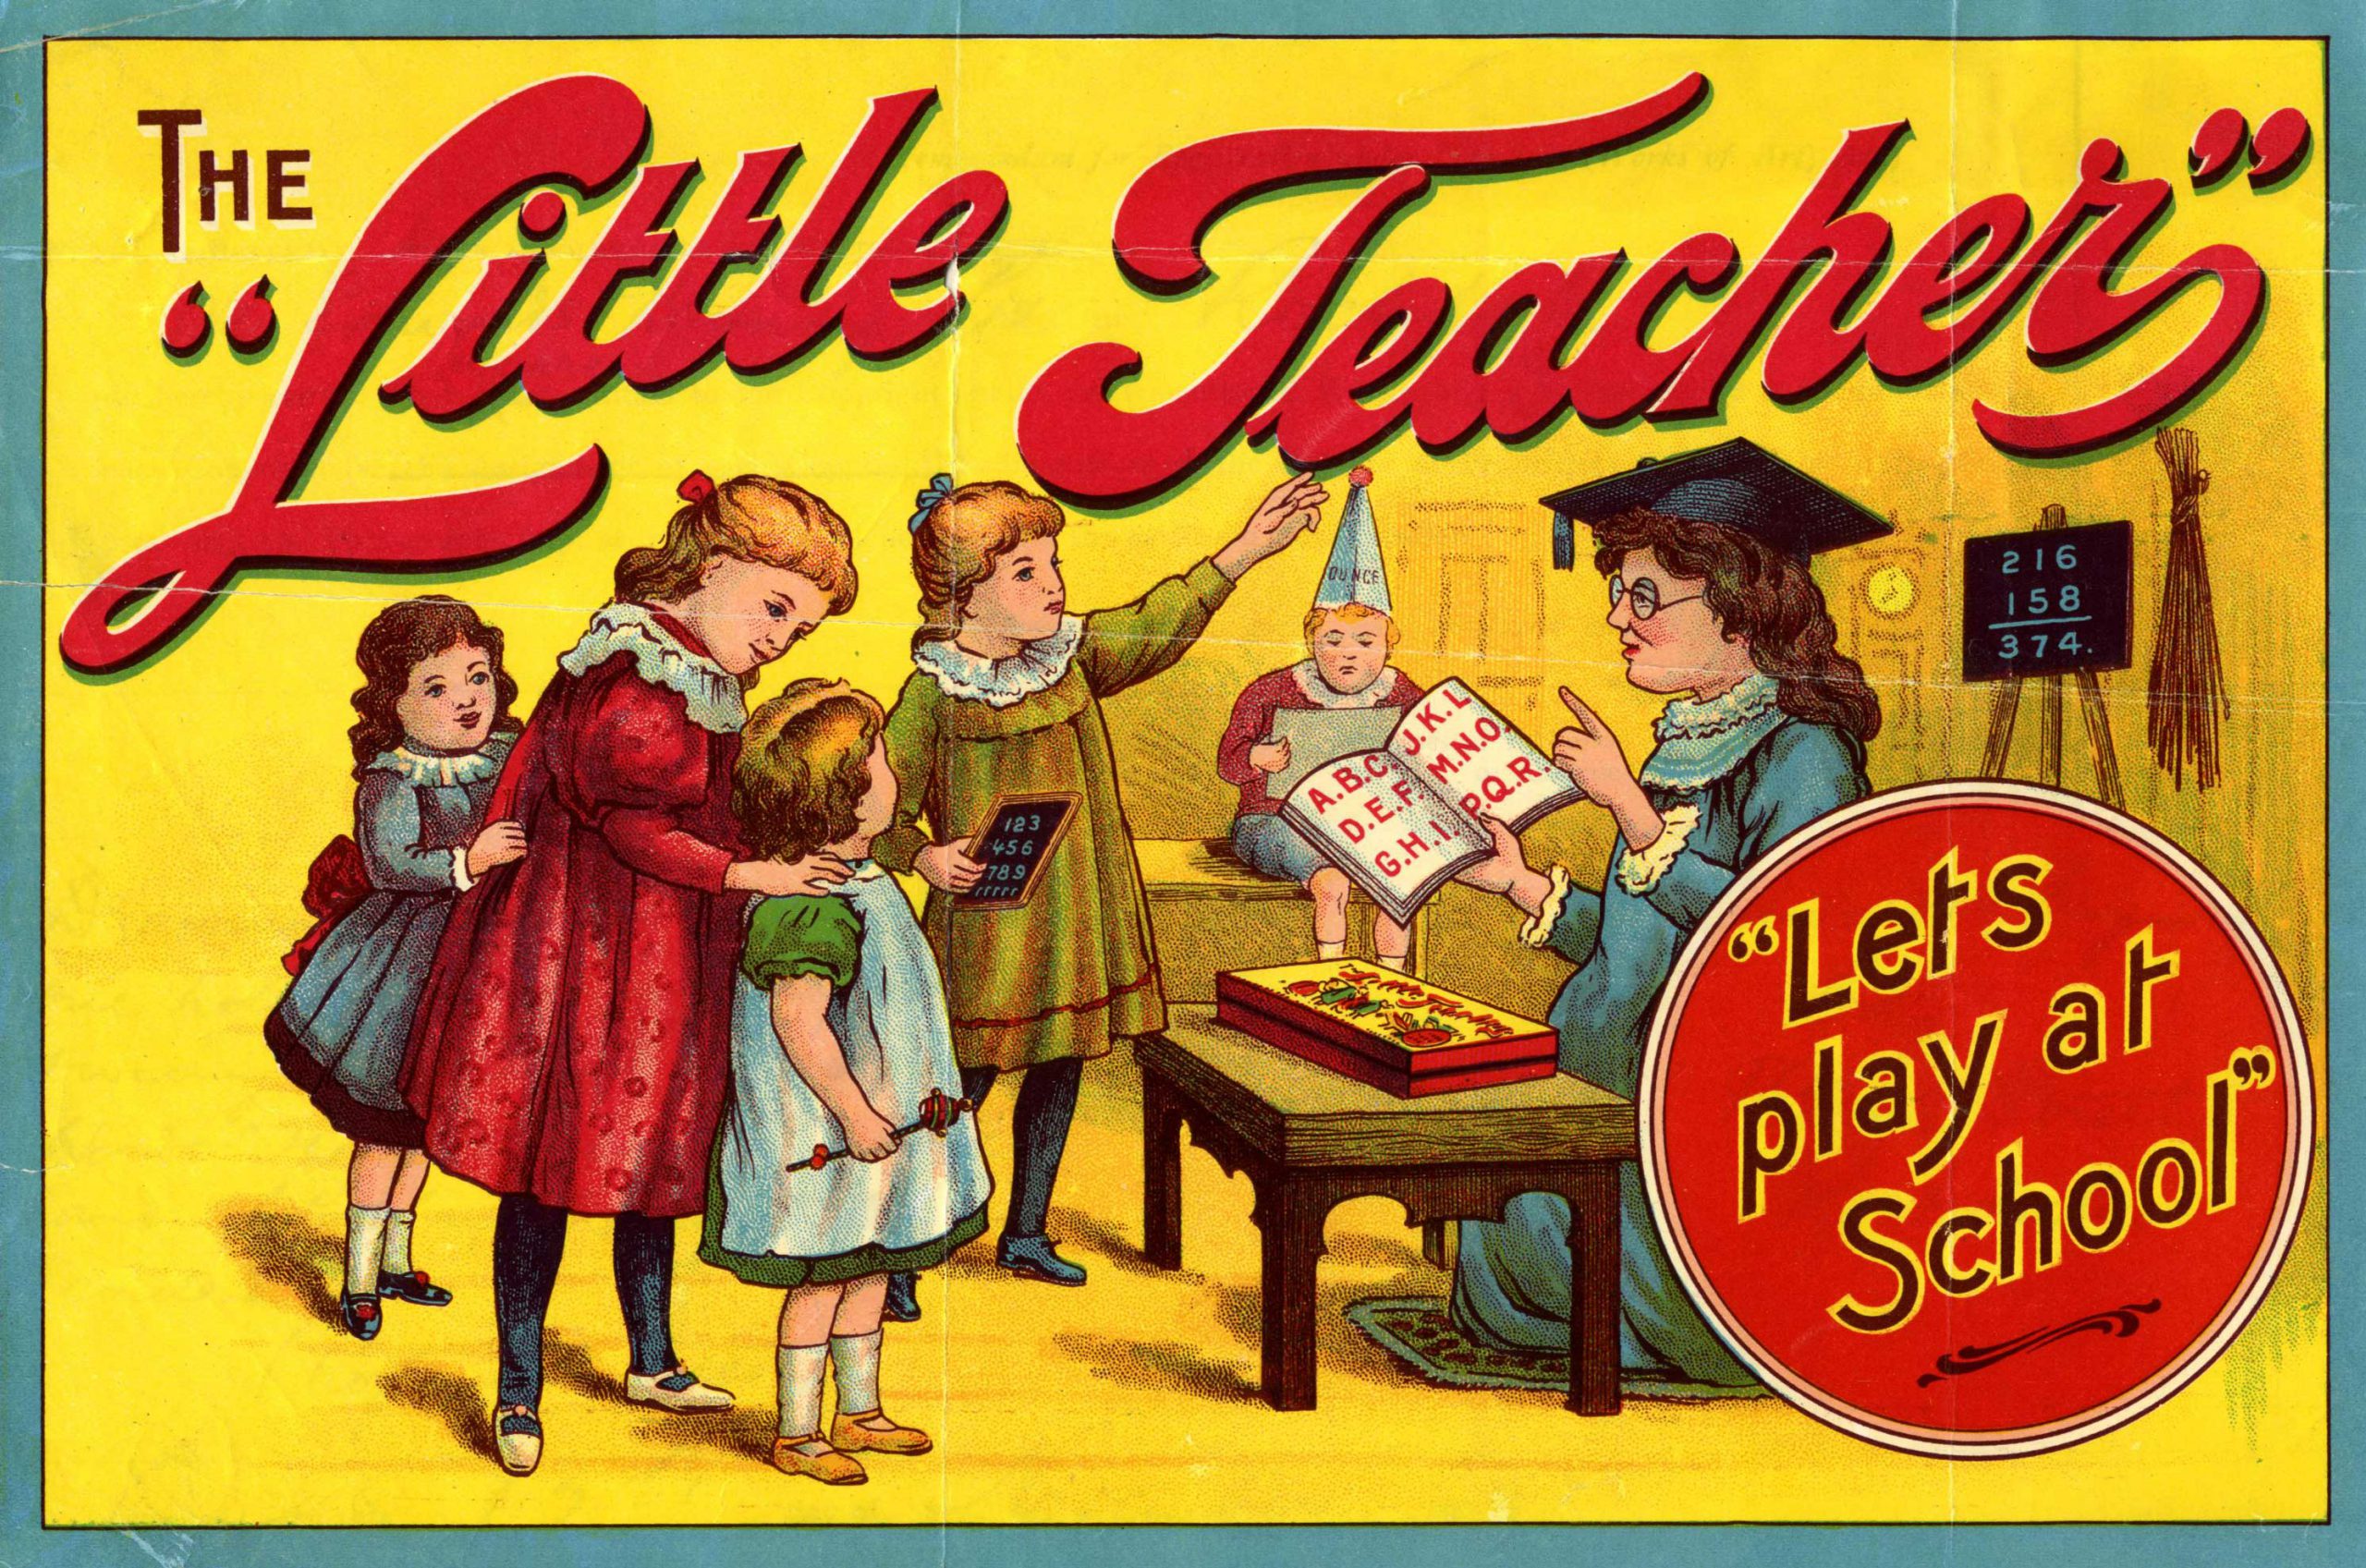 An illustration of five young children in Victorian dress playing at school. The oldest looking child has a teacher's cap and a book teaching the alphabet. A child with a slate places a dunce cap on a doll. The text reads 'The Little Teacher. Let's play at school